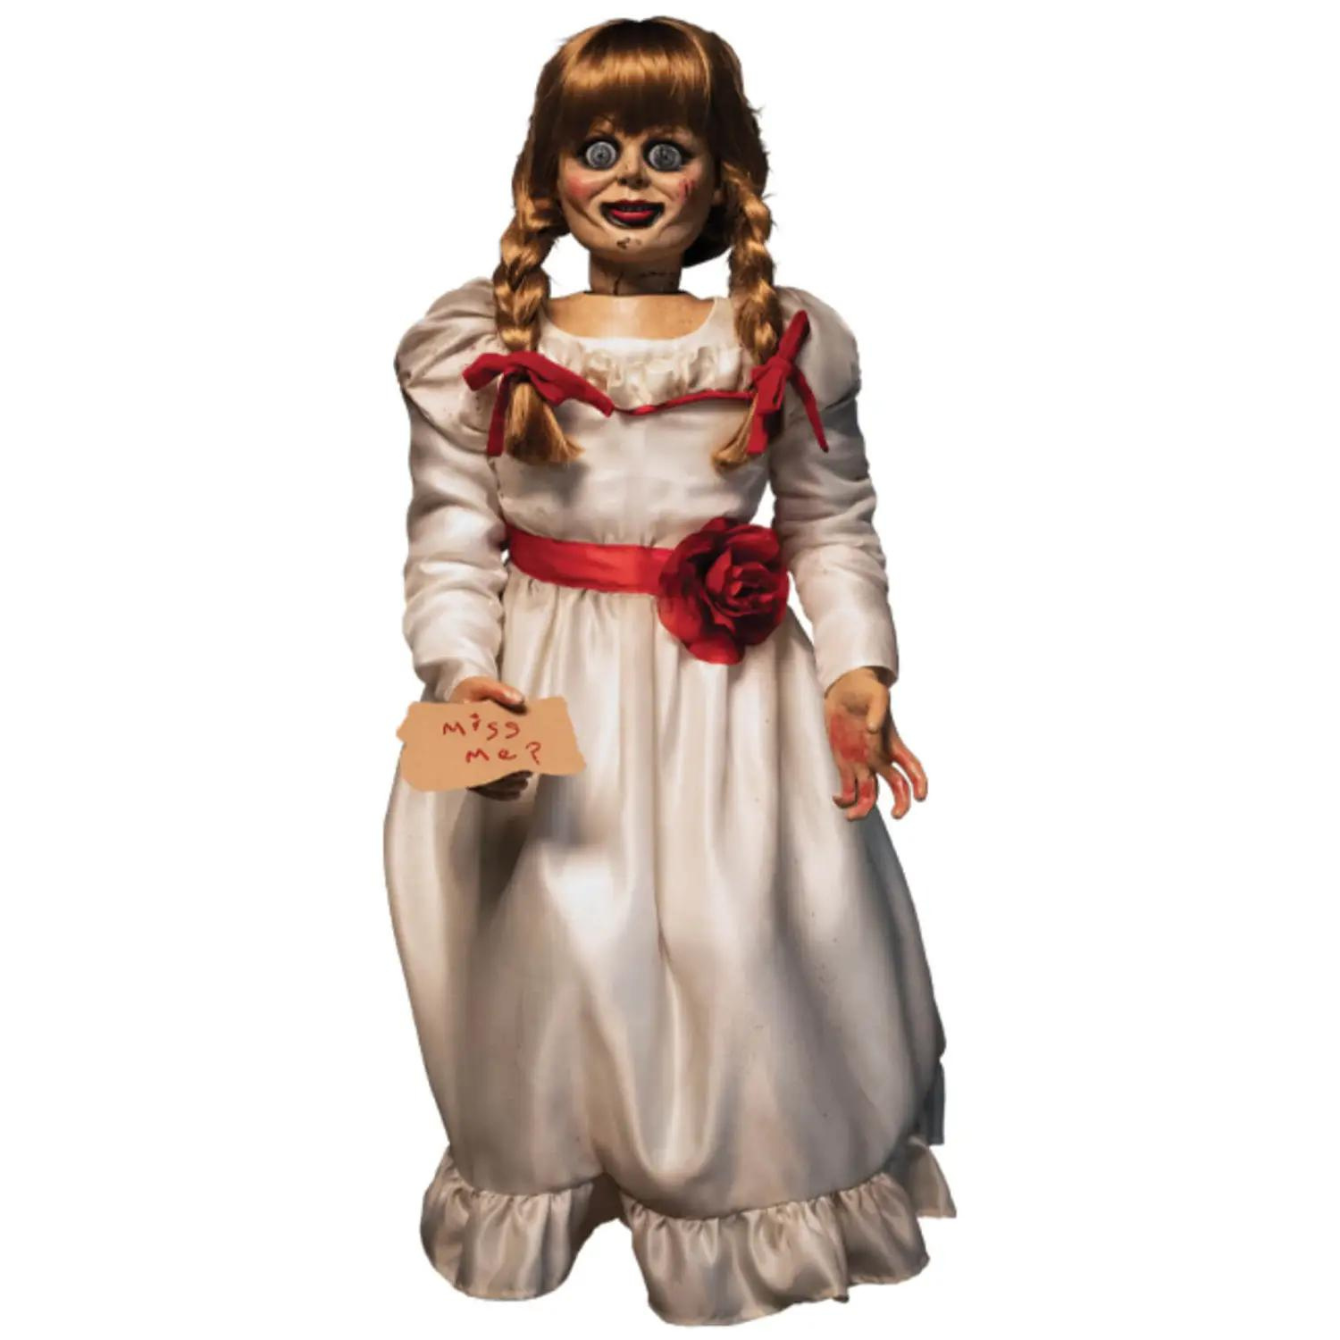 The Conjuring - Annabelle Doll 1:1 Scale Replica